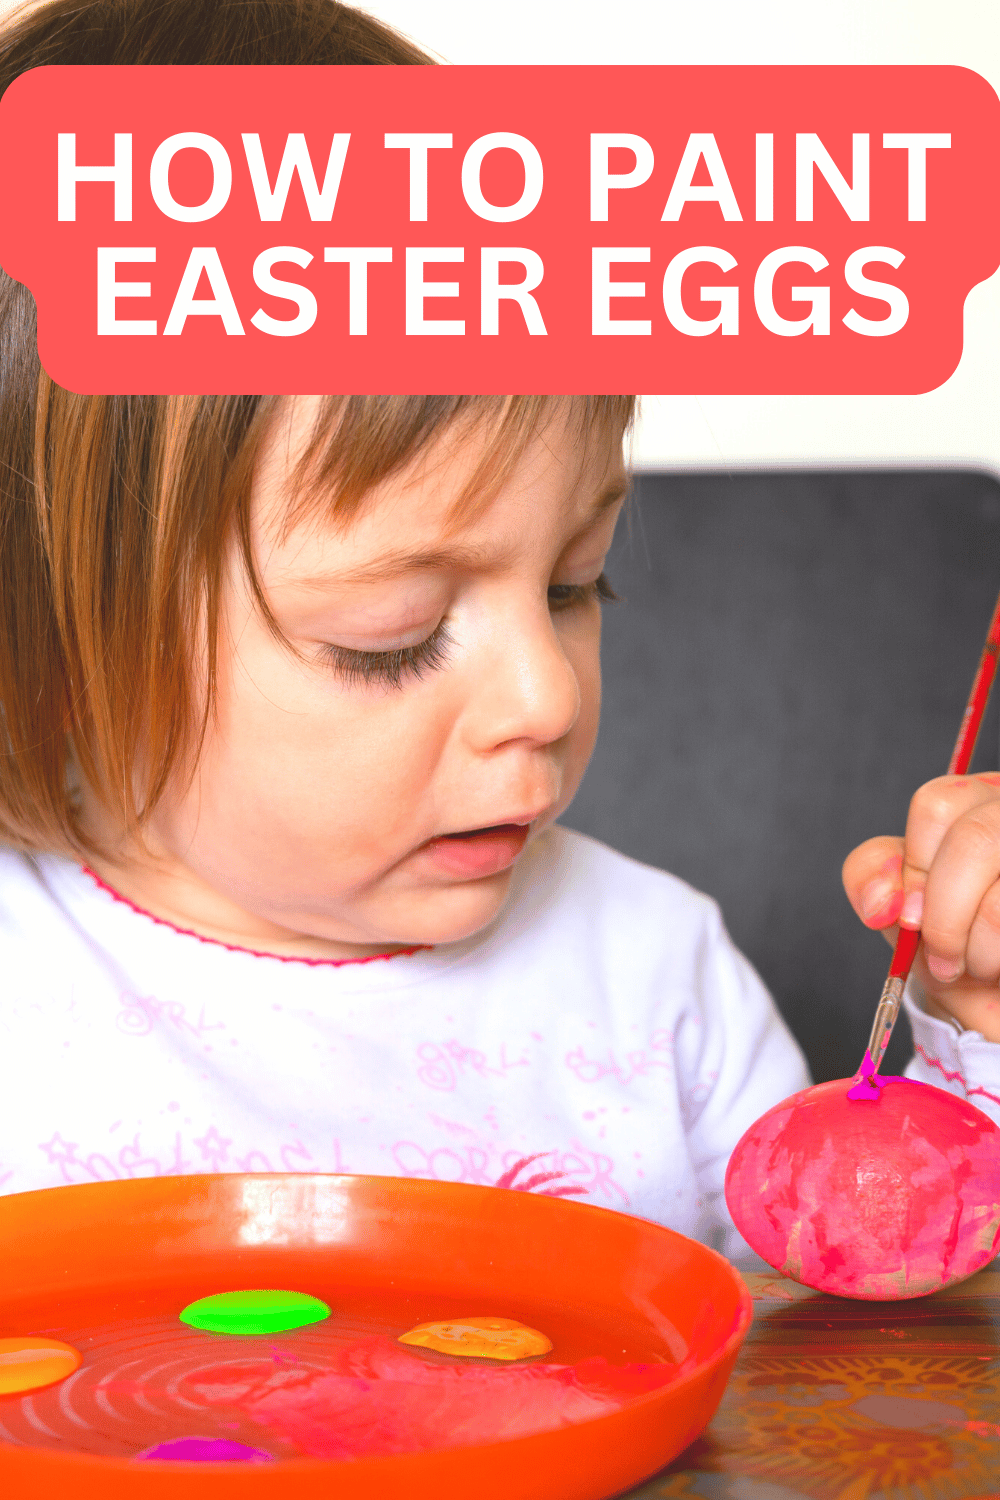 Fun Ways To Dye Easter Eggs For Kids (How To Paint Eggs For Easter for easy egg dying ideas) Toddler painting Easter eggs 